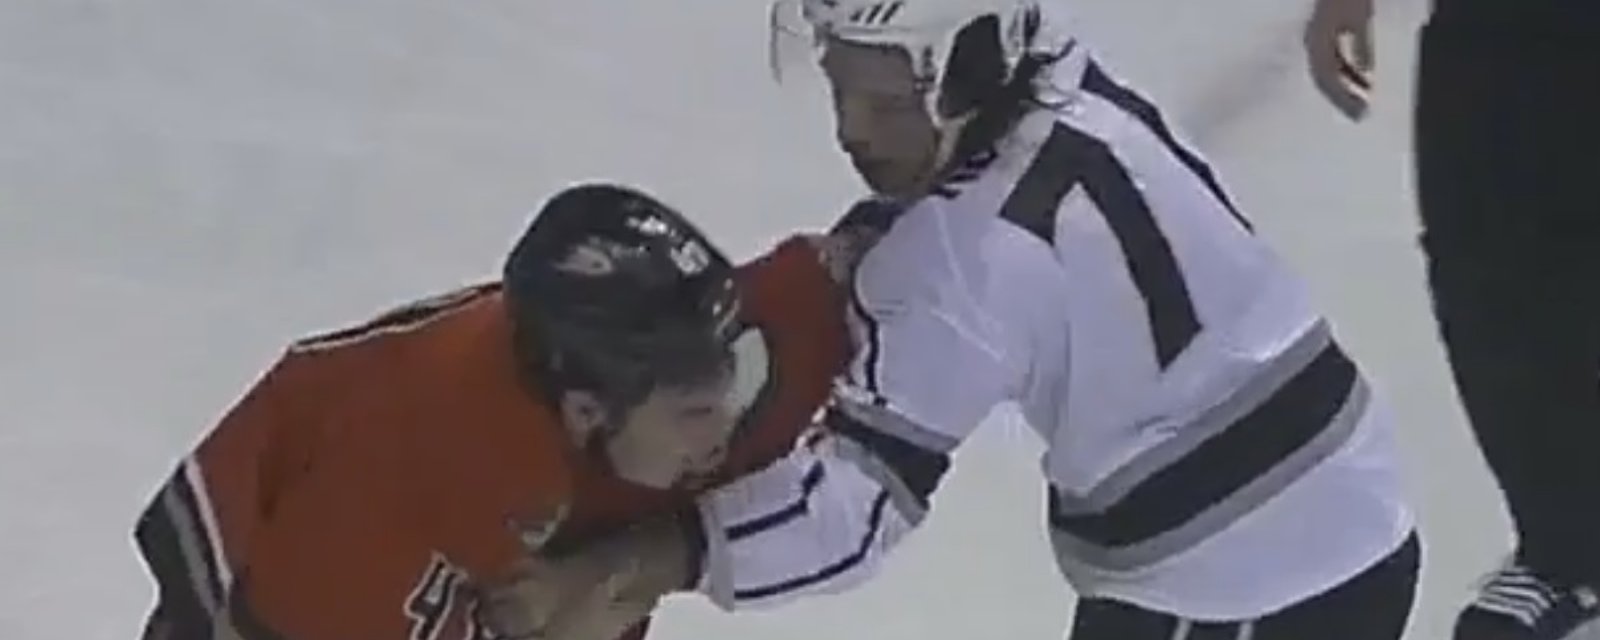 Jordan Nolan and Jared Boll go to war in back and forth battle.